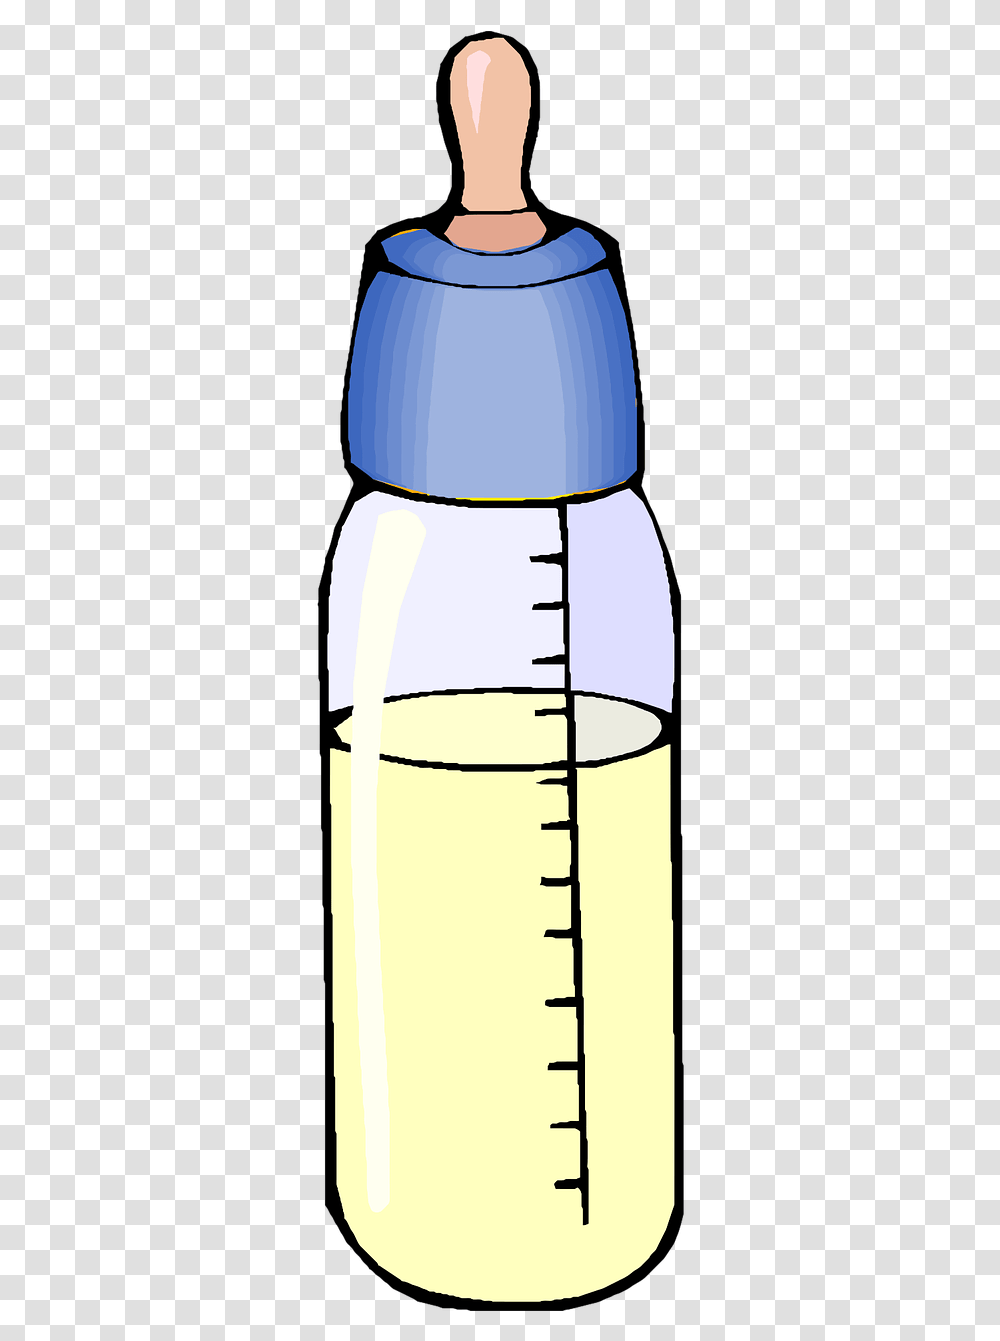 Baby Girl Bottle, Jar, Cup, Lamp, Glass Transparent Png